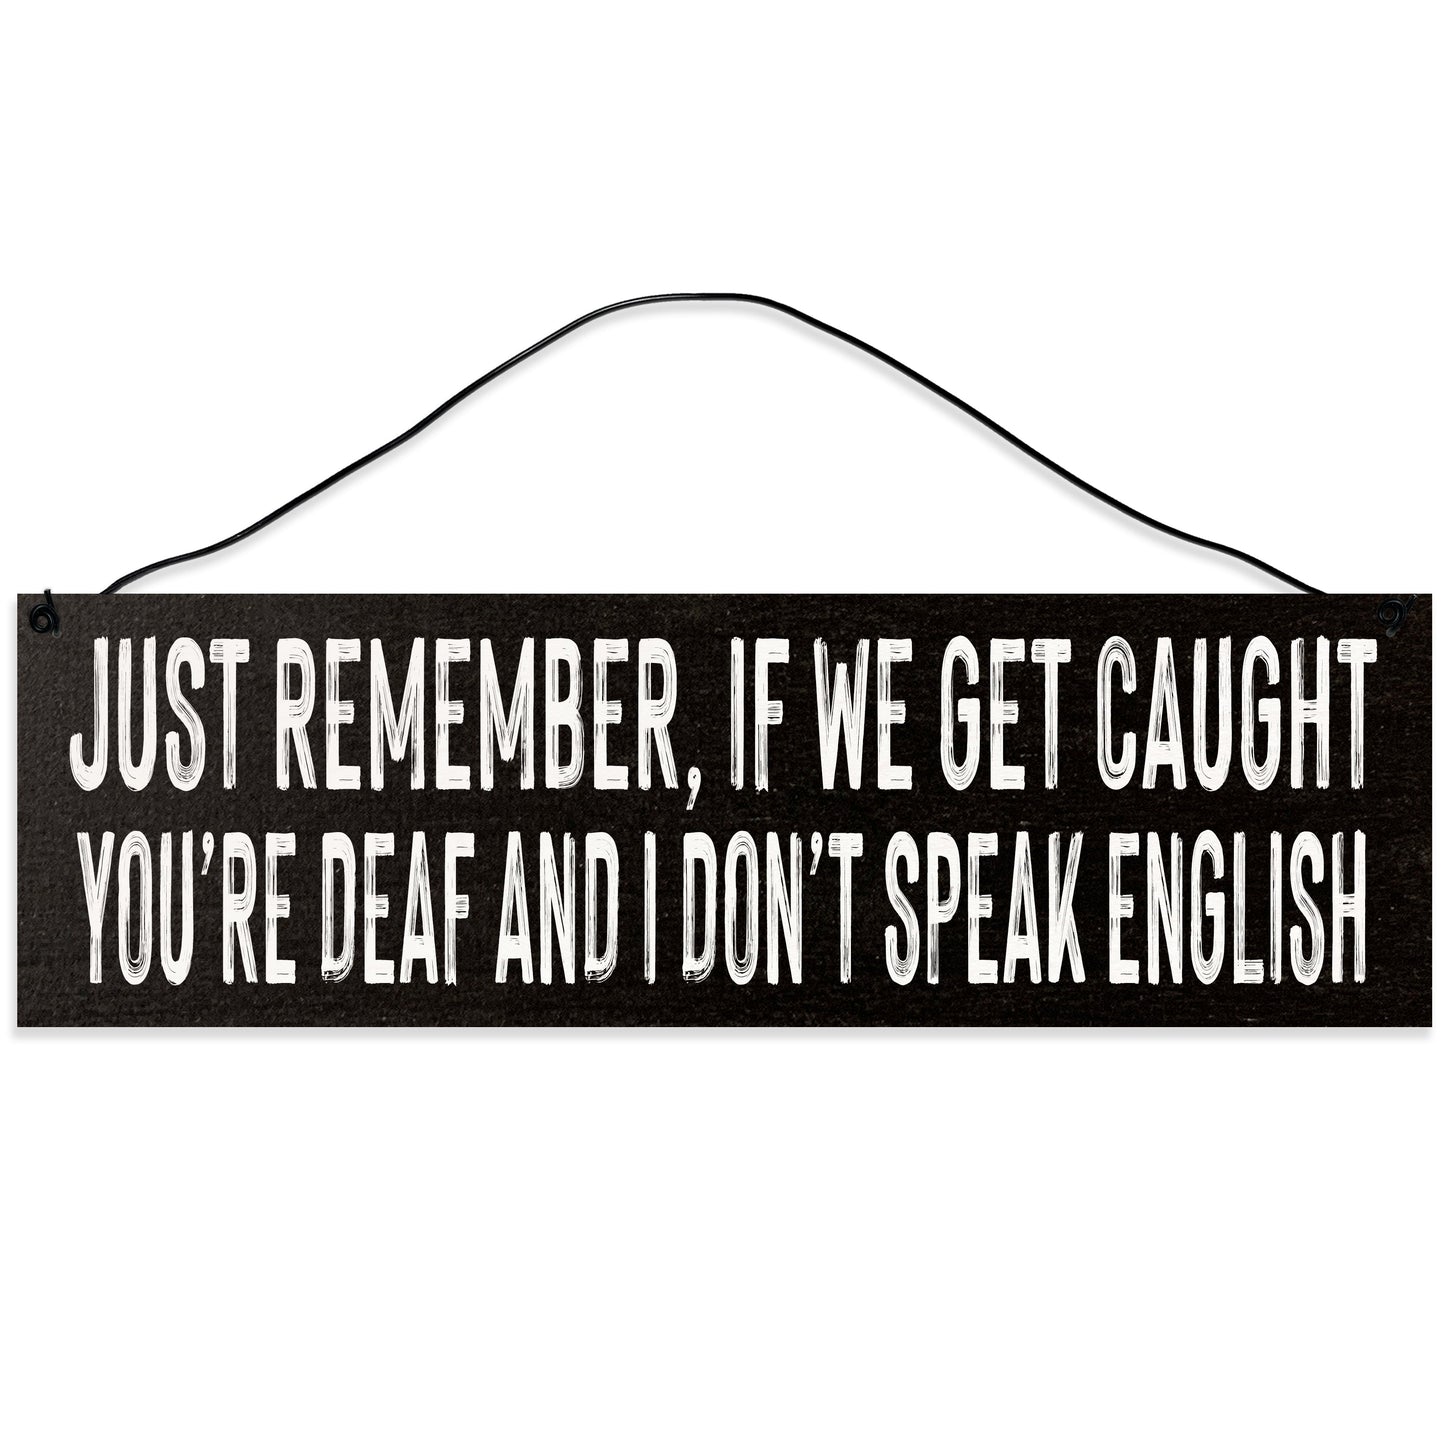 Sawyer's Mill - You're Deaf I don't Speak English. Wood Sign for Home or Office. Measures 3x10 inches.